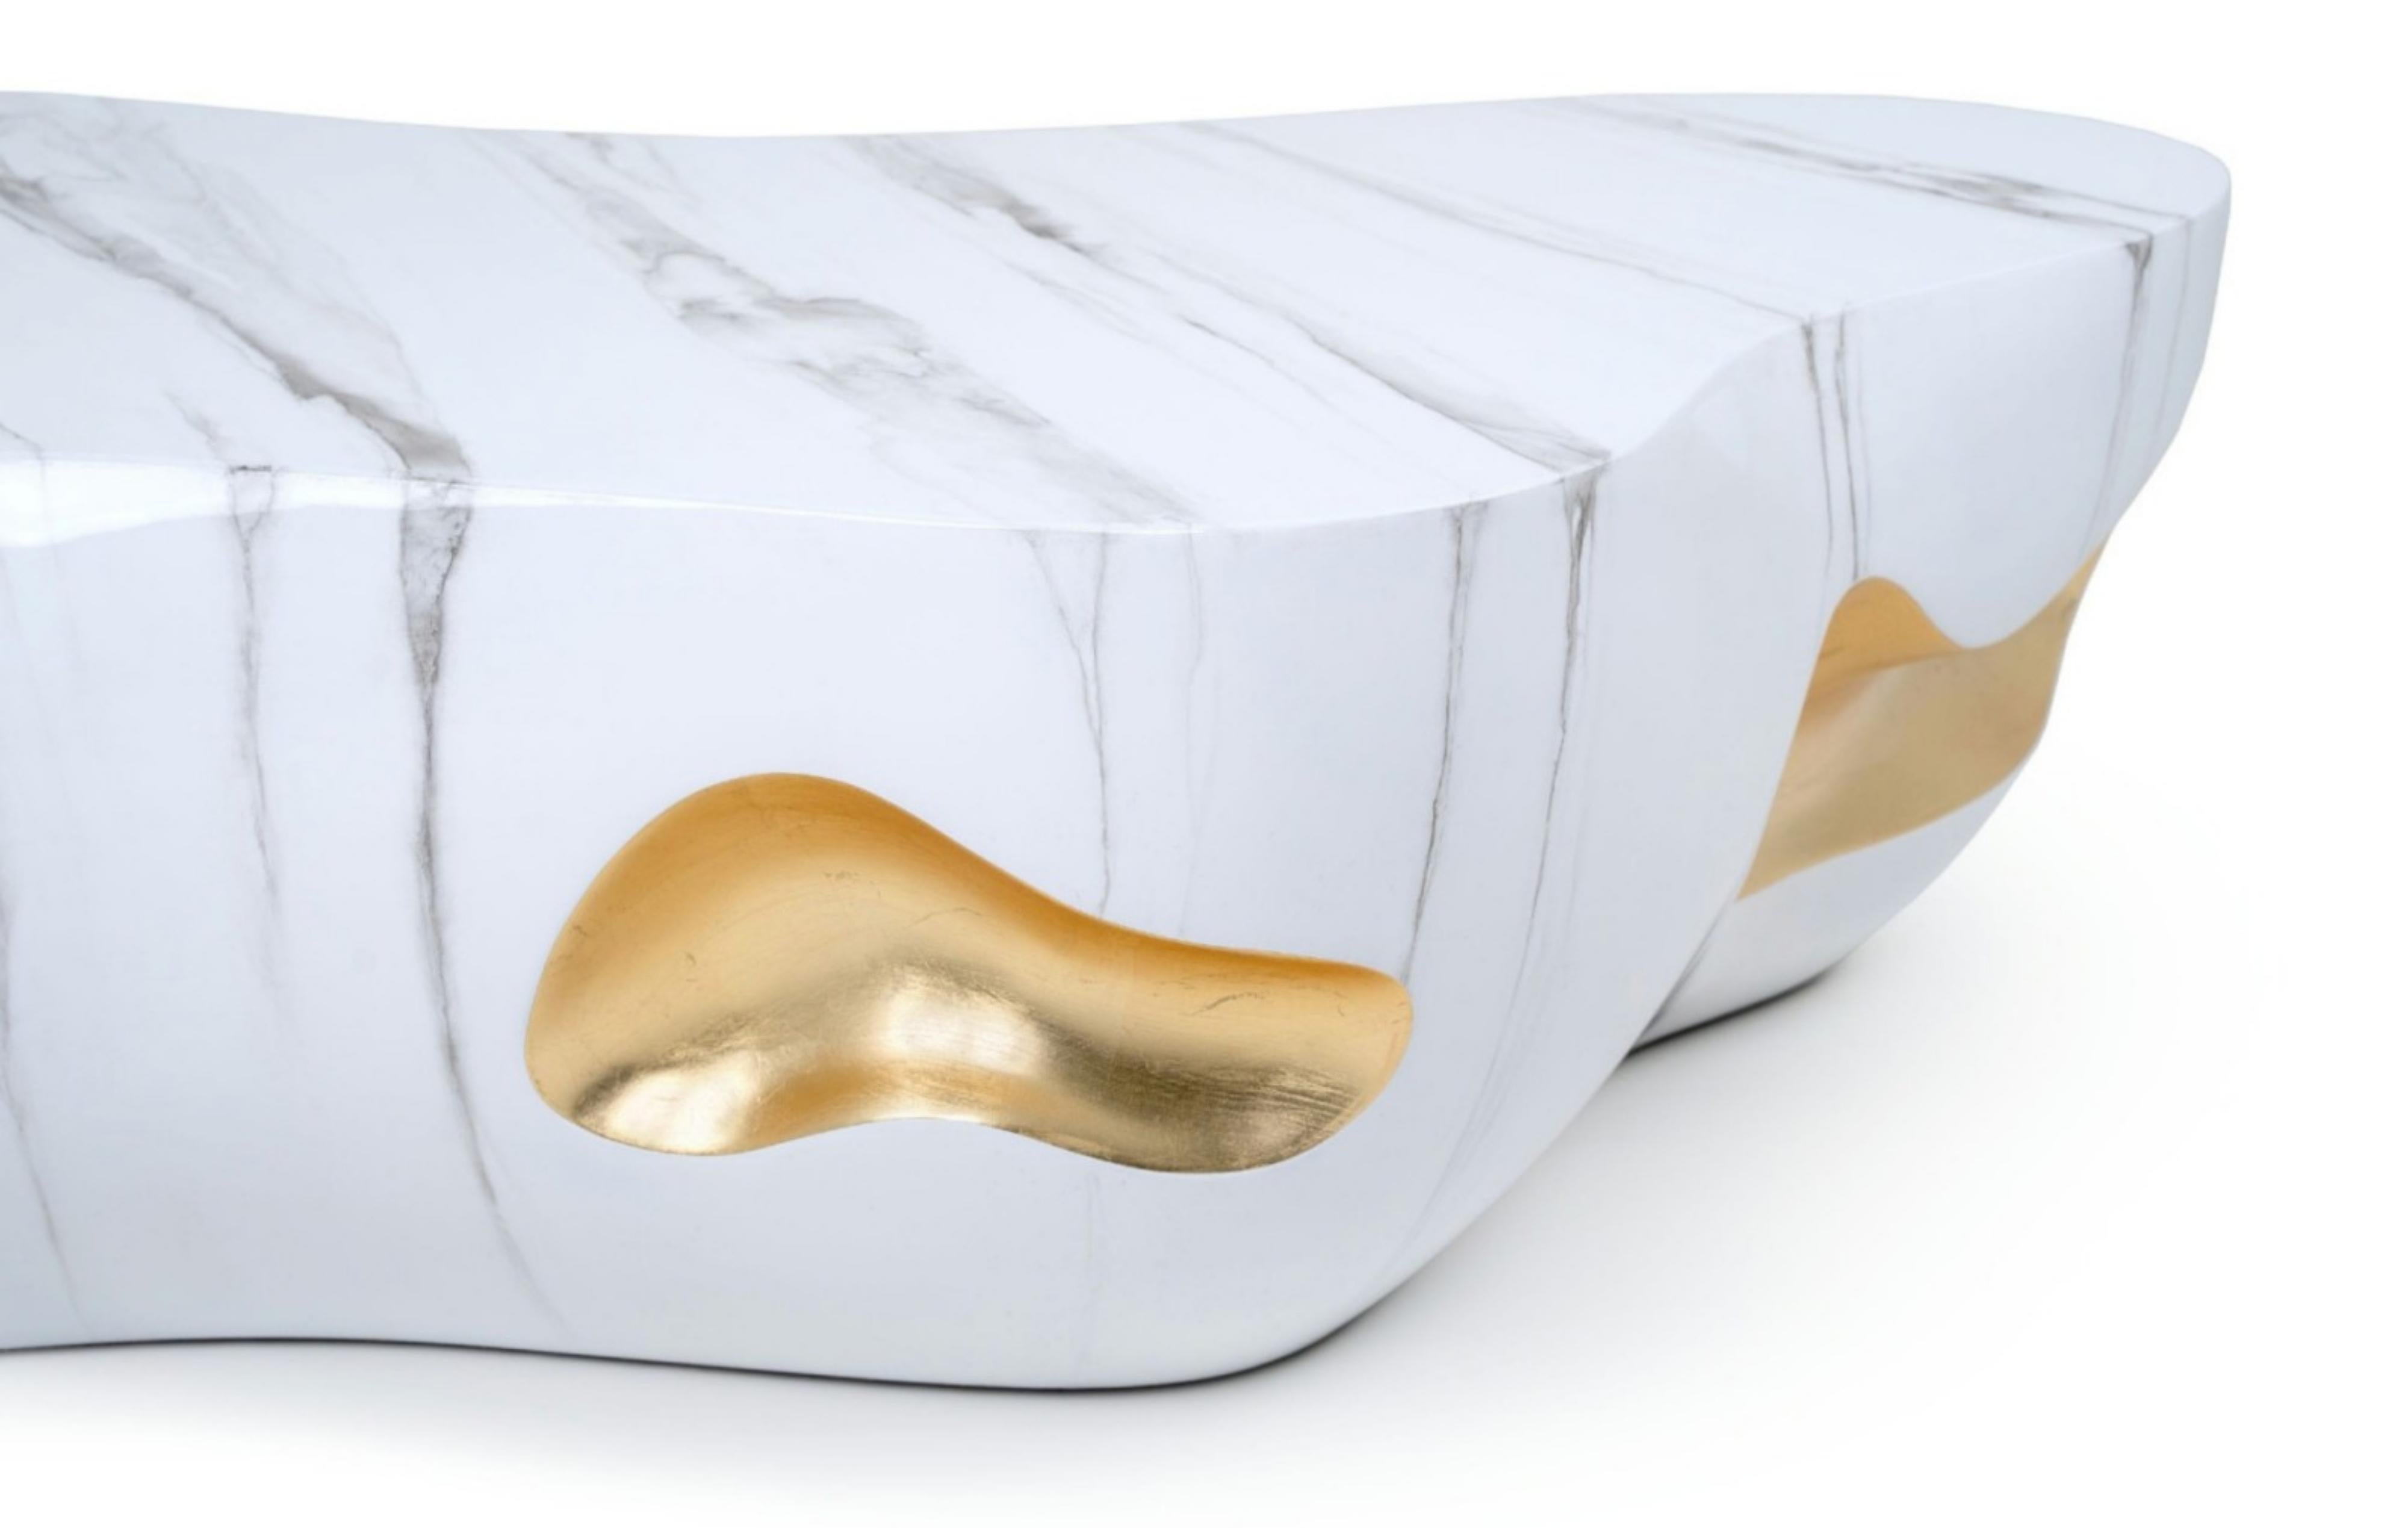 NEW DESIGN Coffee Table COLLECTION 2024

Dimensions (cm): 150 x 100 x 40
Dimensions (in): 59.1 x 39.4 x 15.7

Immerse your space in luxury with this coffee table . Crafted by skilled artisans, these sculptural fiberglass tables boast an organic